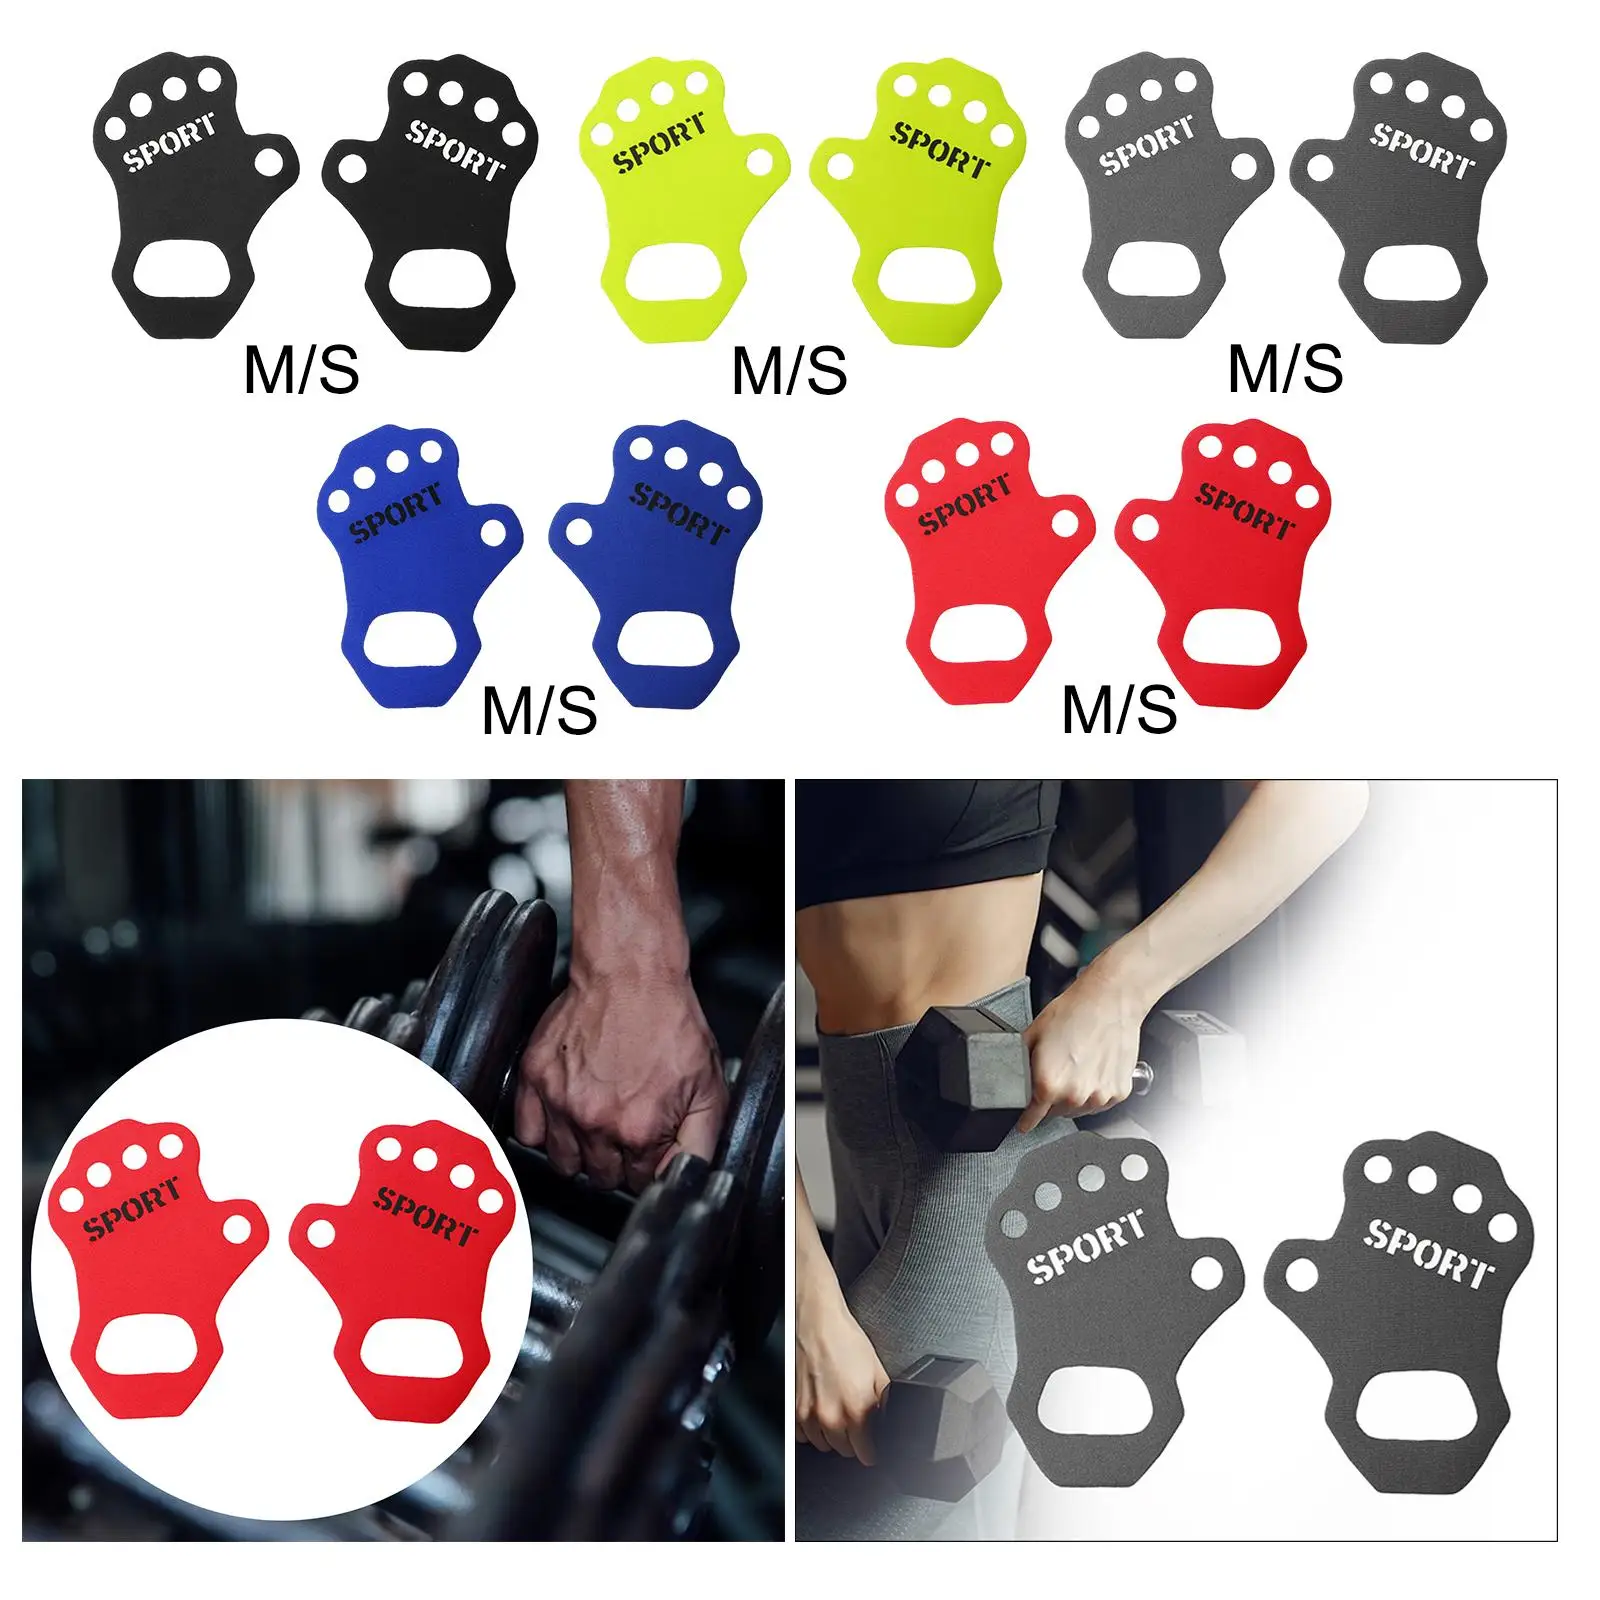 Weight Lifting Hand Grips Rubber Padded Workout Grips Gloves for Weightlifting Home Exercise Gym Working Out Palm Protector